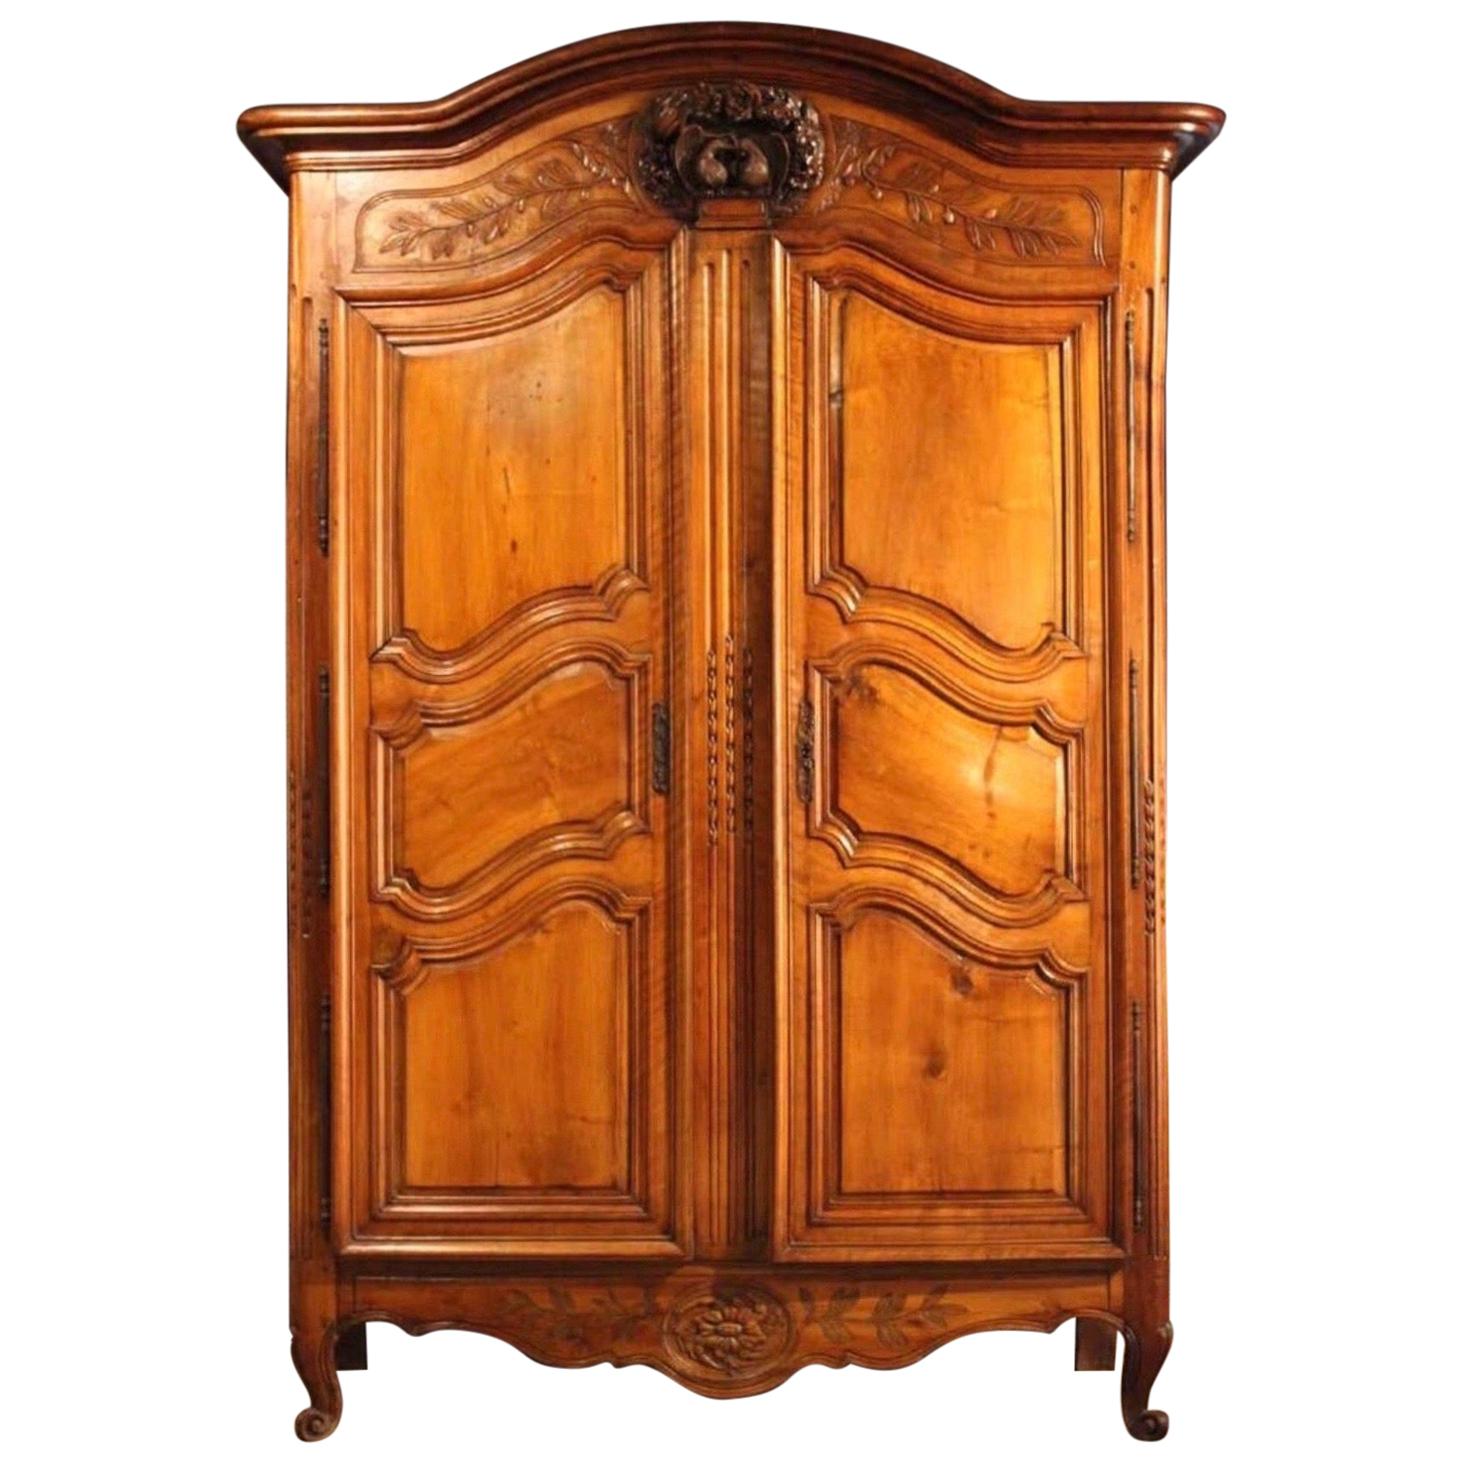 19th Century French Provincial Walnut and Cherryood Armoire with Carved Doves